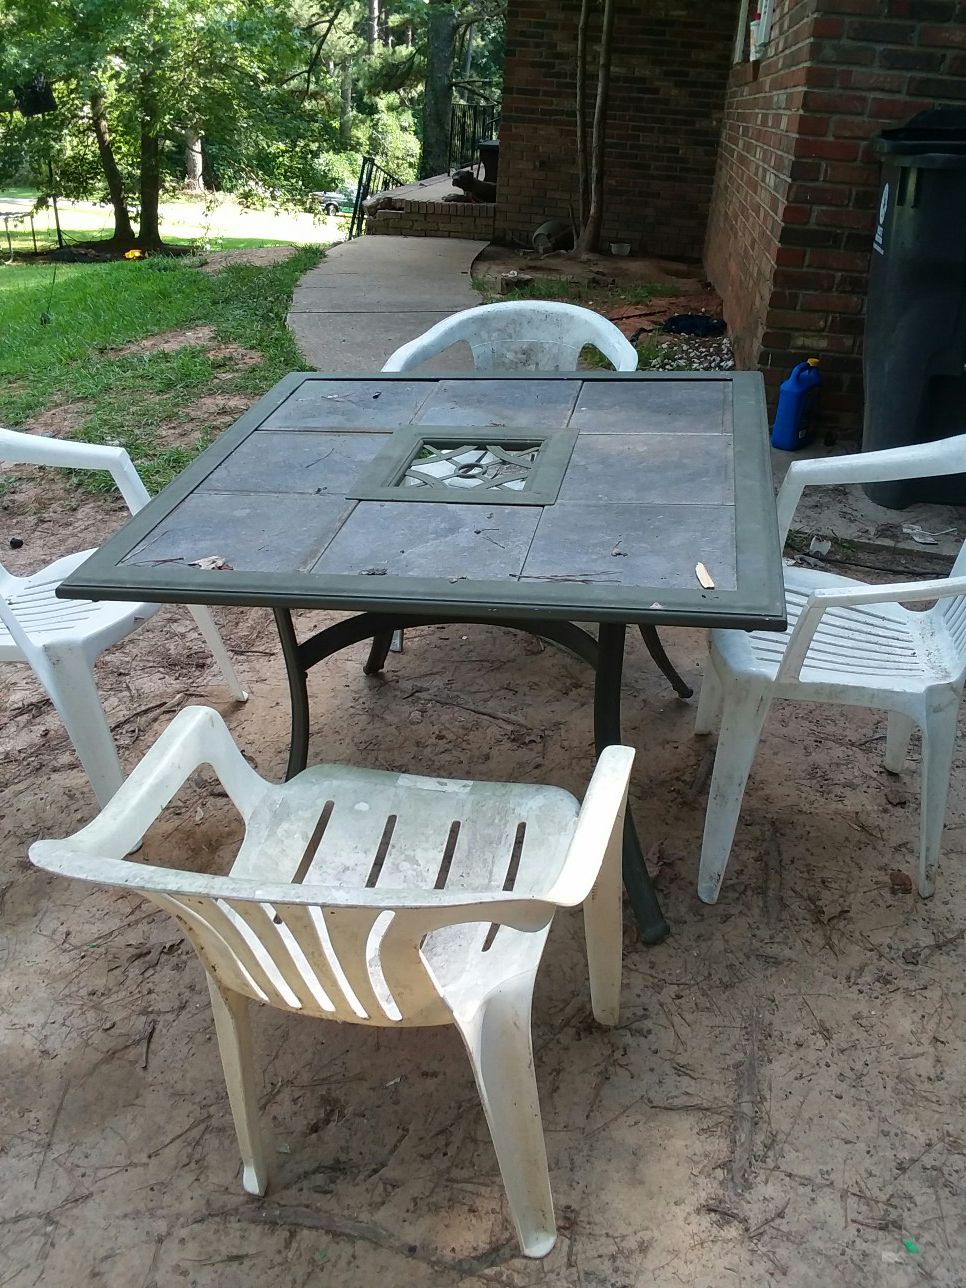 Out door furniture with 4 chairs will deliver for a small fee